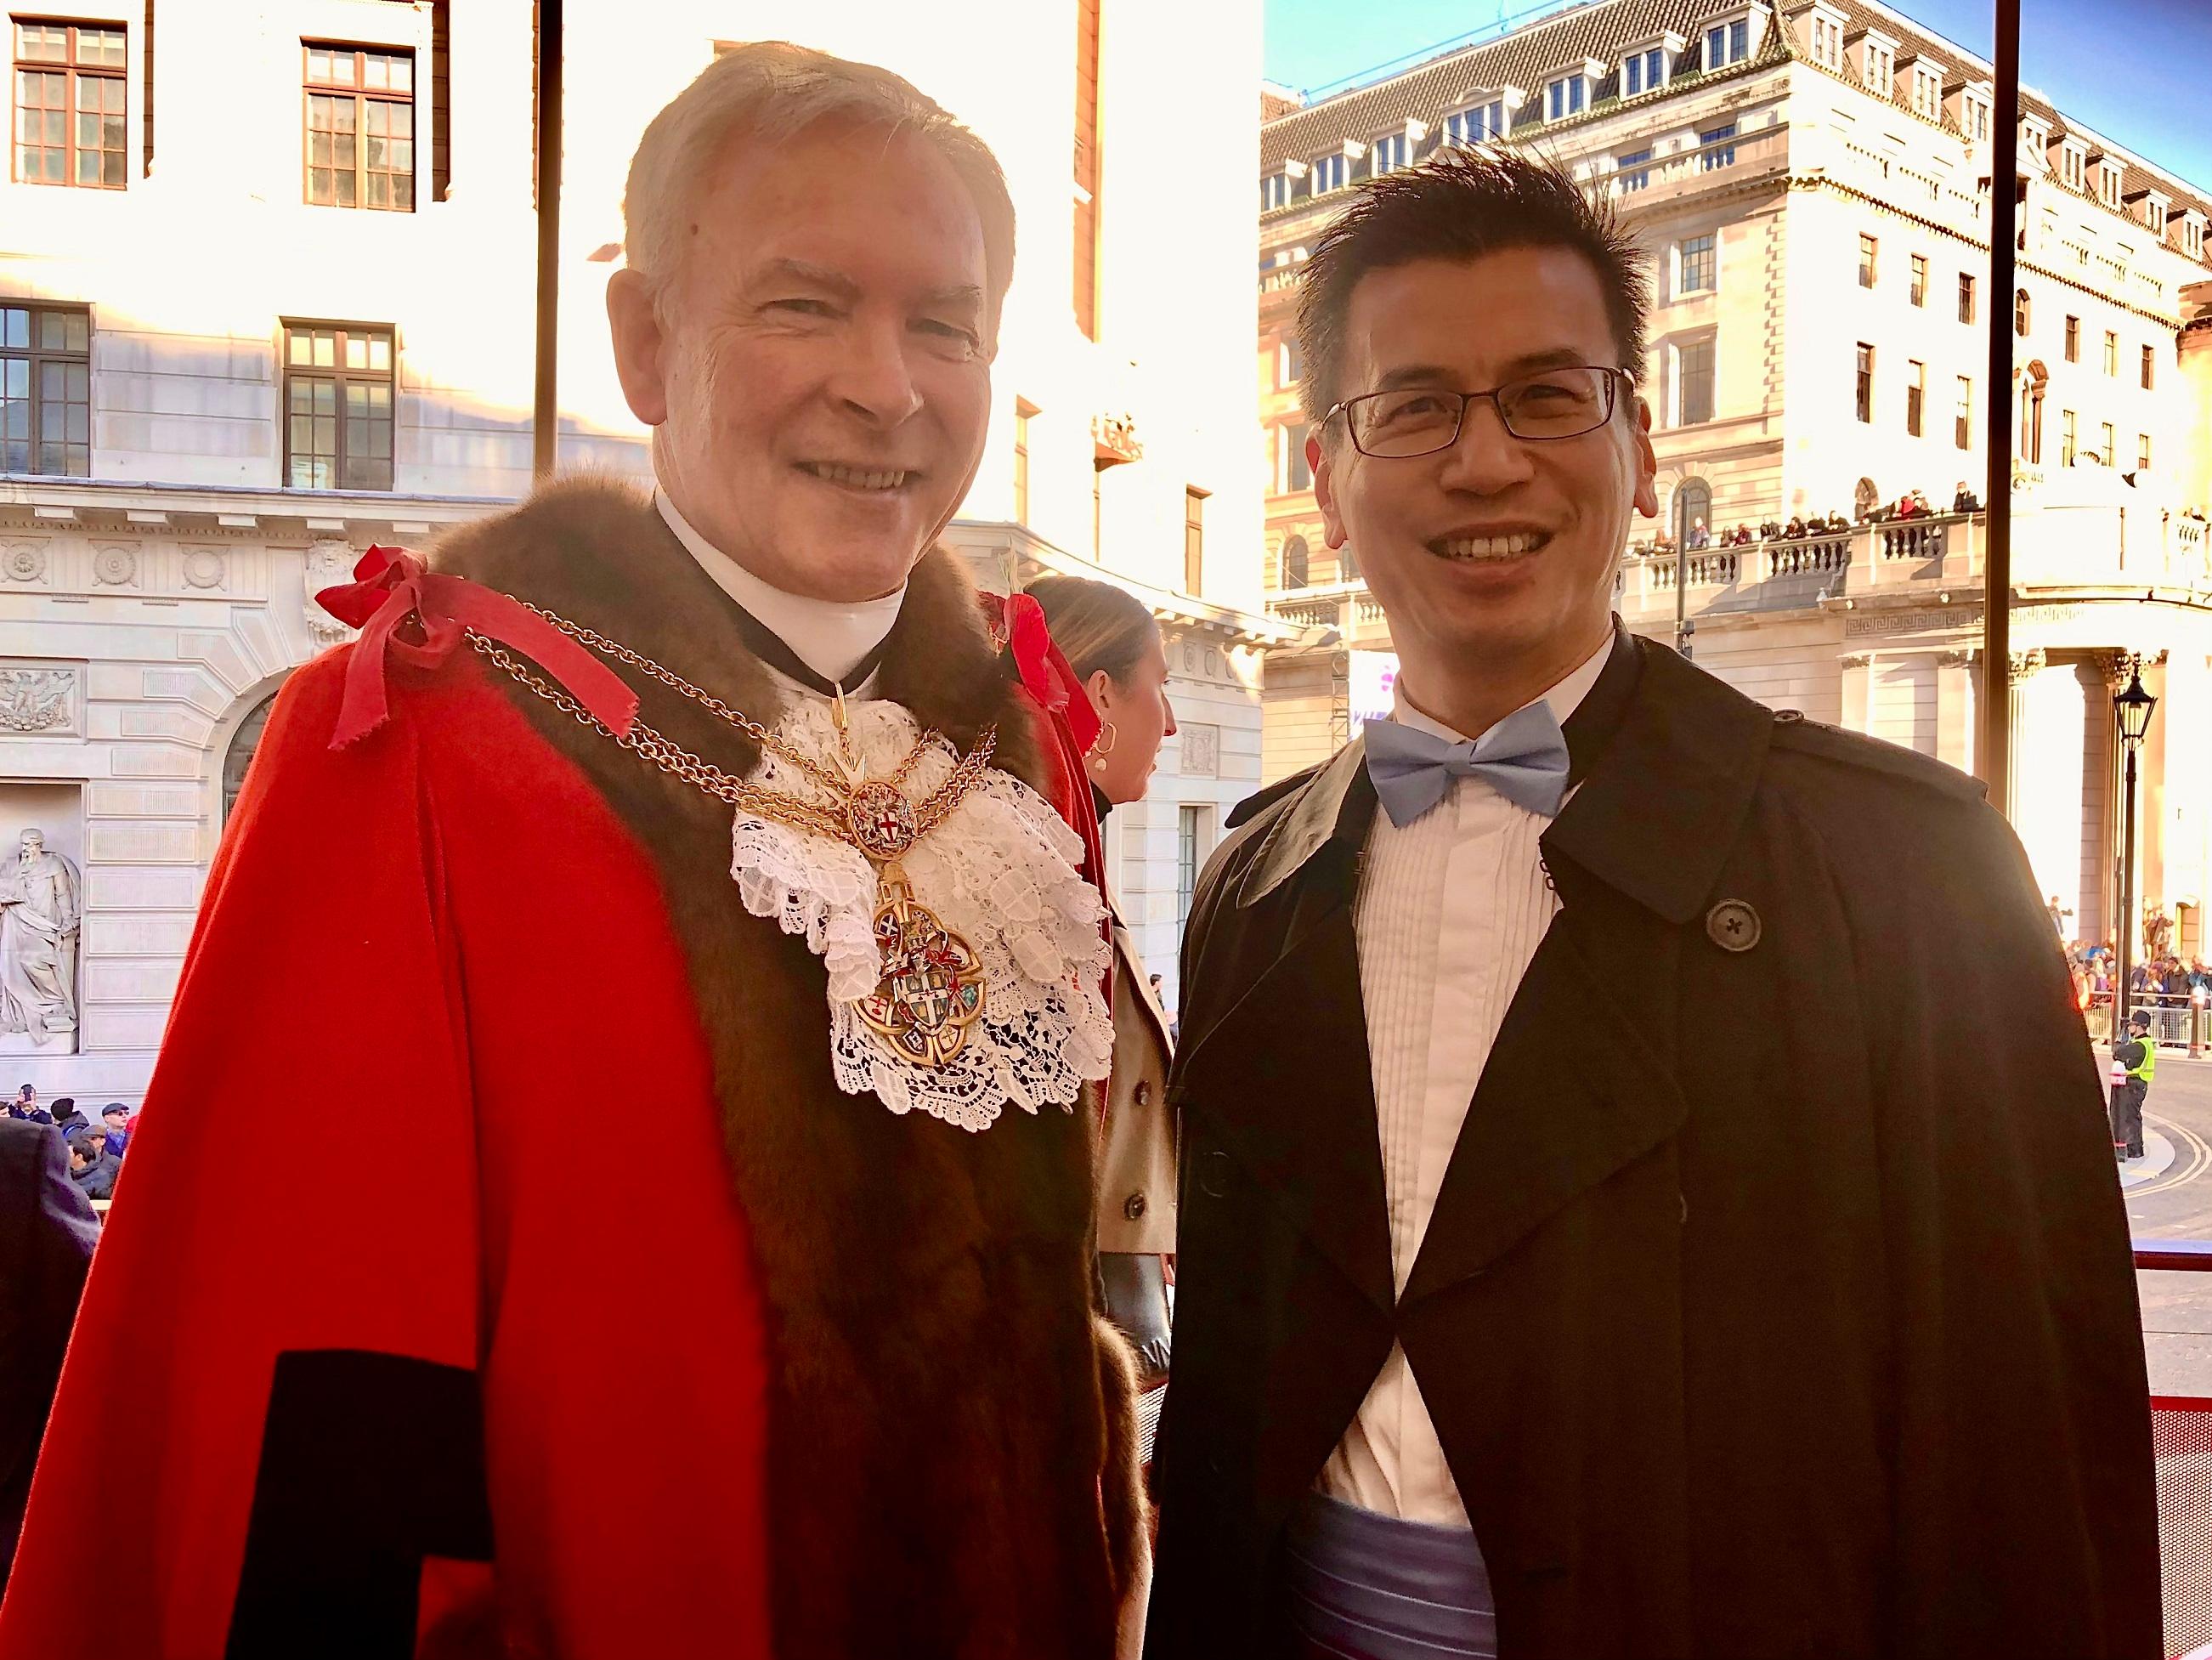 The Hong Kong Economic and Trade Office, London (London ETO) took part in the City of London Lord Mayor's Show on November 11 (London time) with a float highlighting Hong Kong's plan to achieve carbon neutrality before 2050. Photo shows the outgoing Lord Mayor of the City of London, Alderman Nicholas Lyons (left) and the Director-General of the London ETO, Mr Gilford Law (right), at Mansion House.